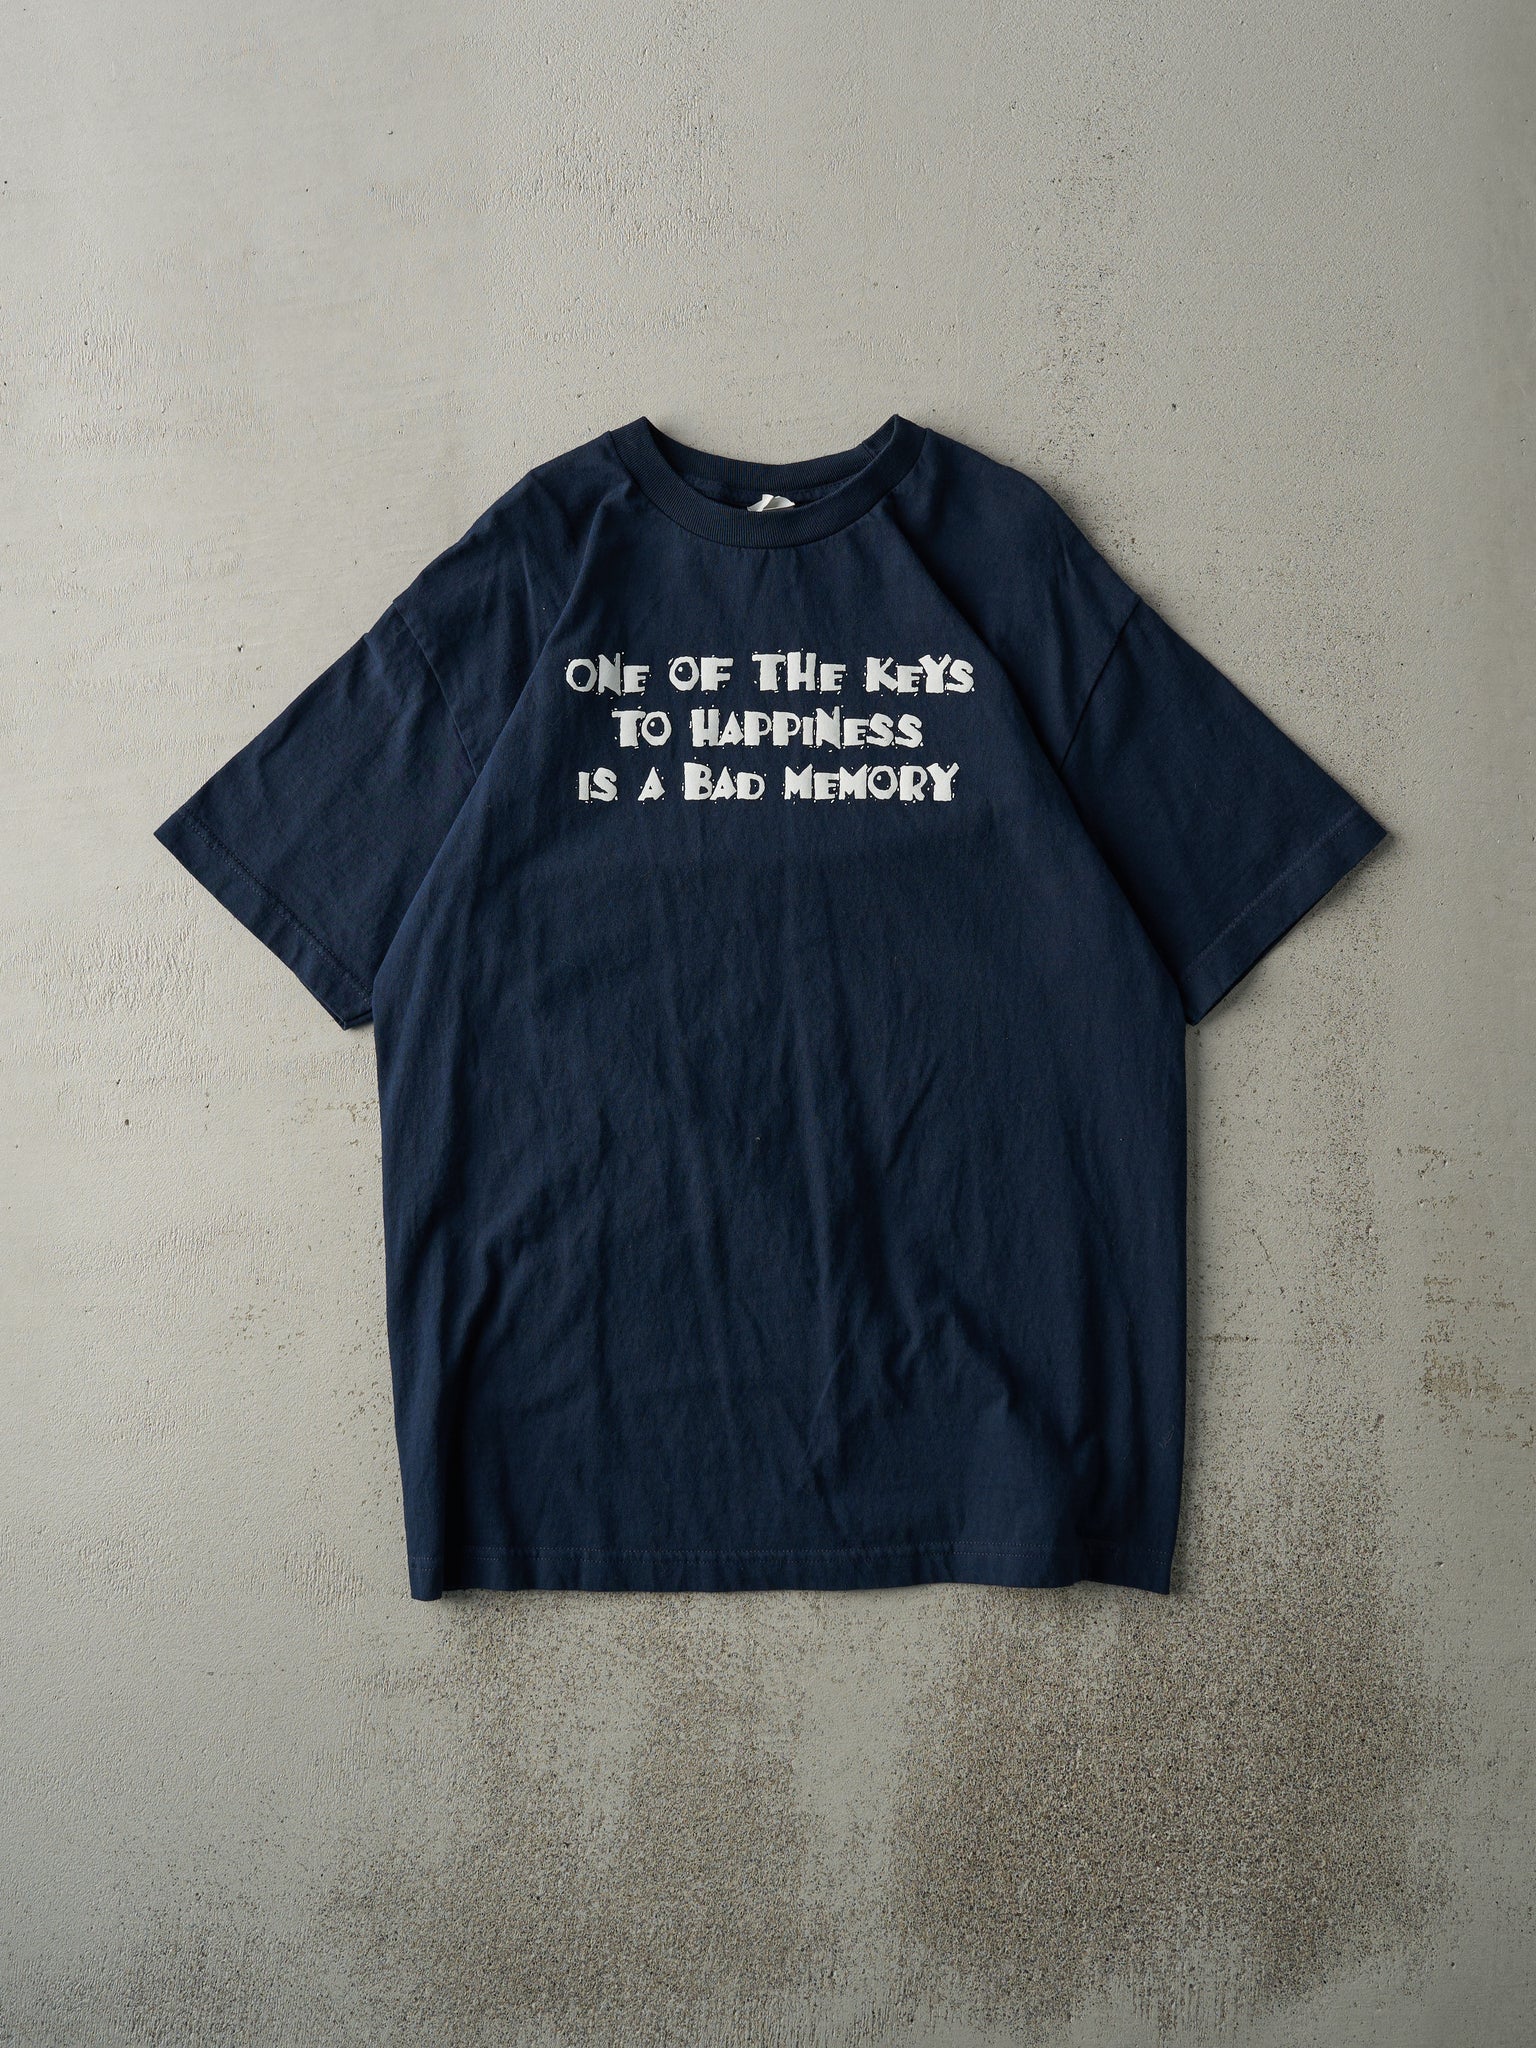 Vintage Y2K Blue "One of the Keys To Happiness" Tee (M)